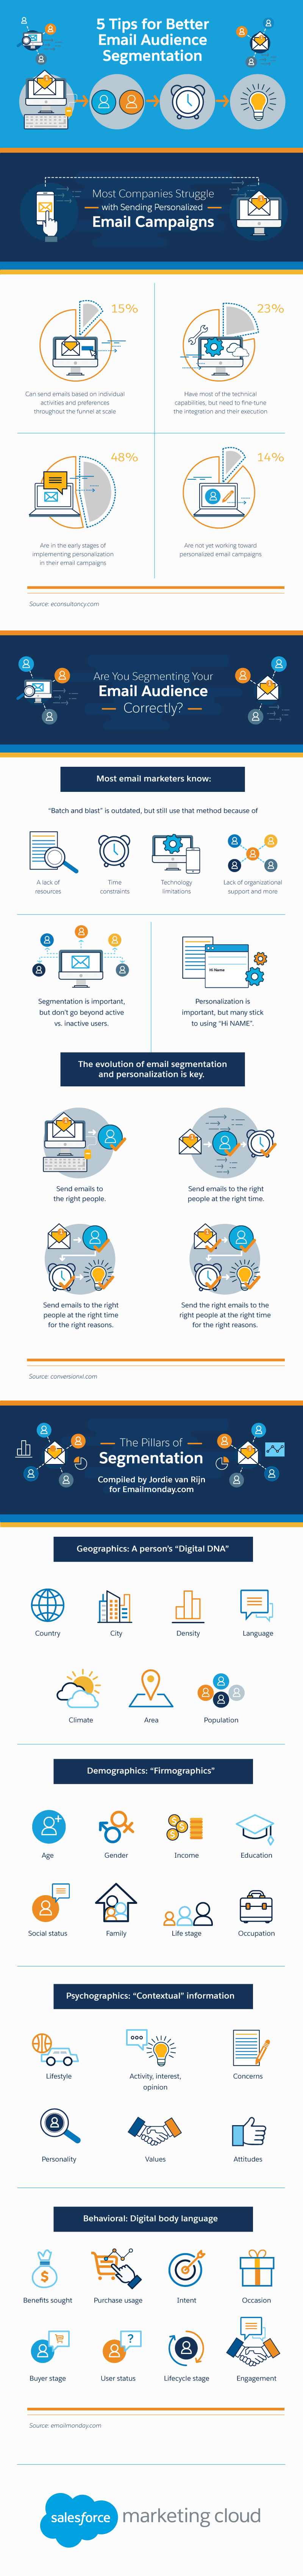 infographic on tips for better email audience segmentation